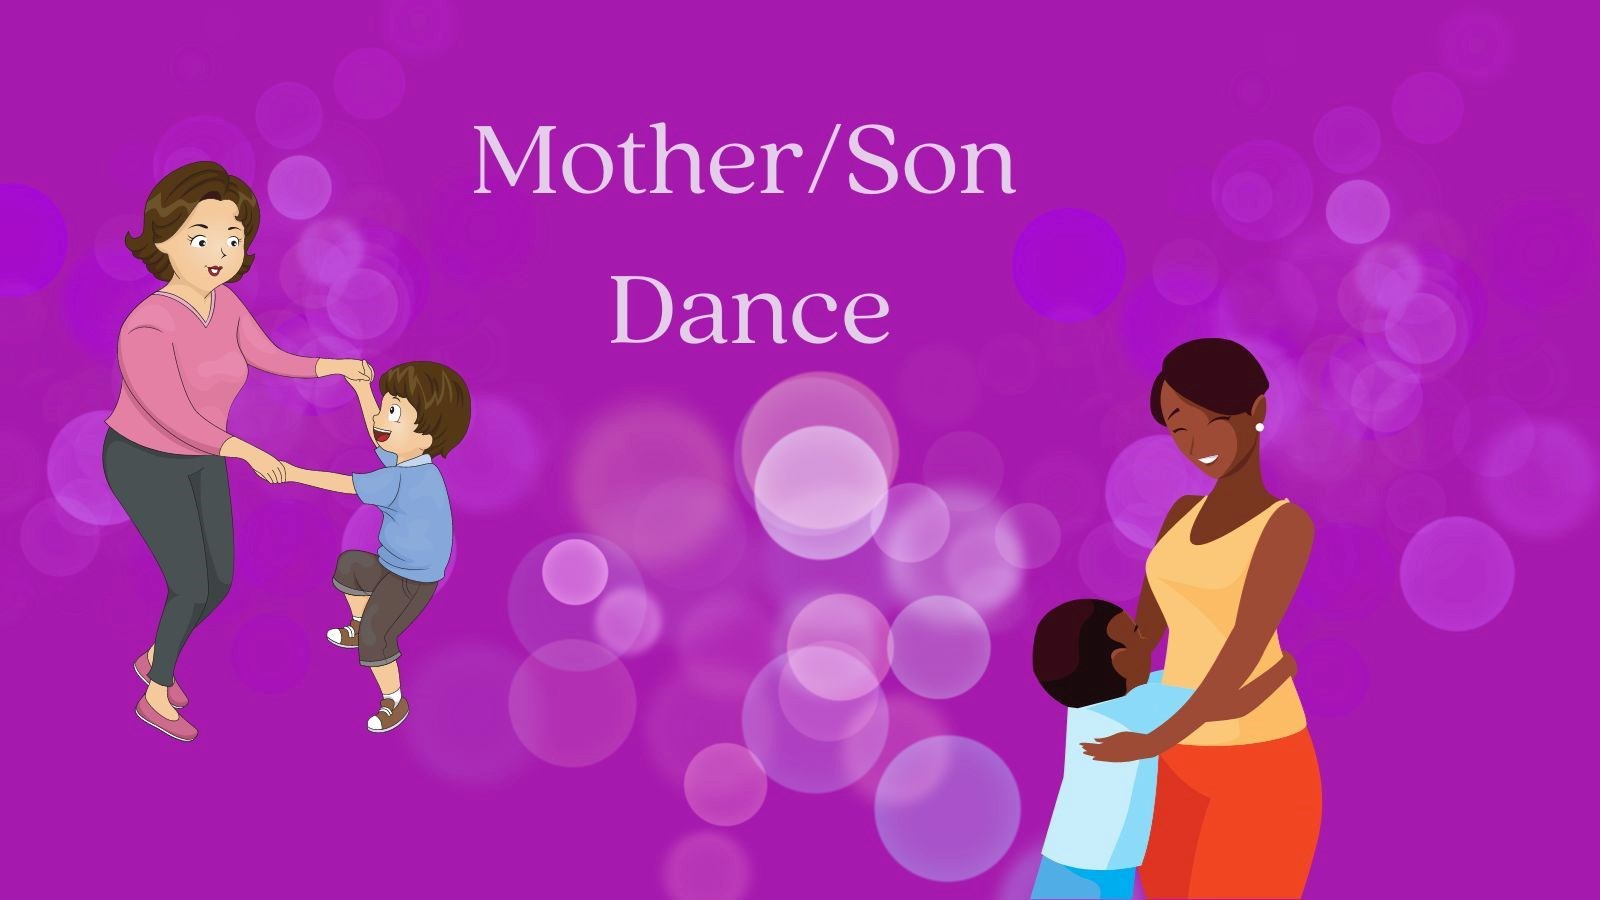 Mothers dancing with sons with purple background, sparkles and the words Mother/Son Dance